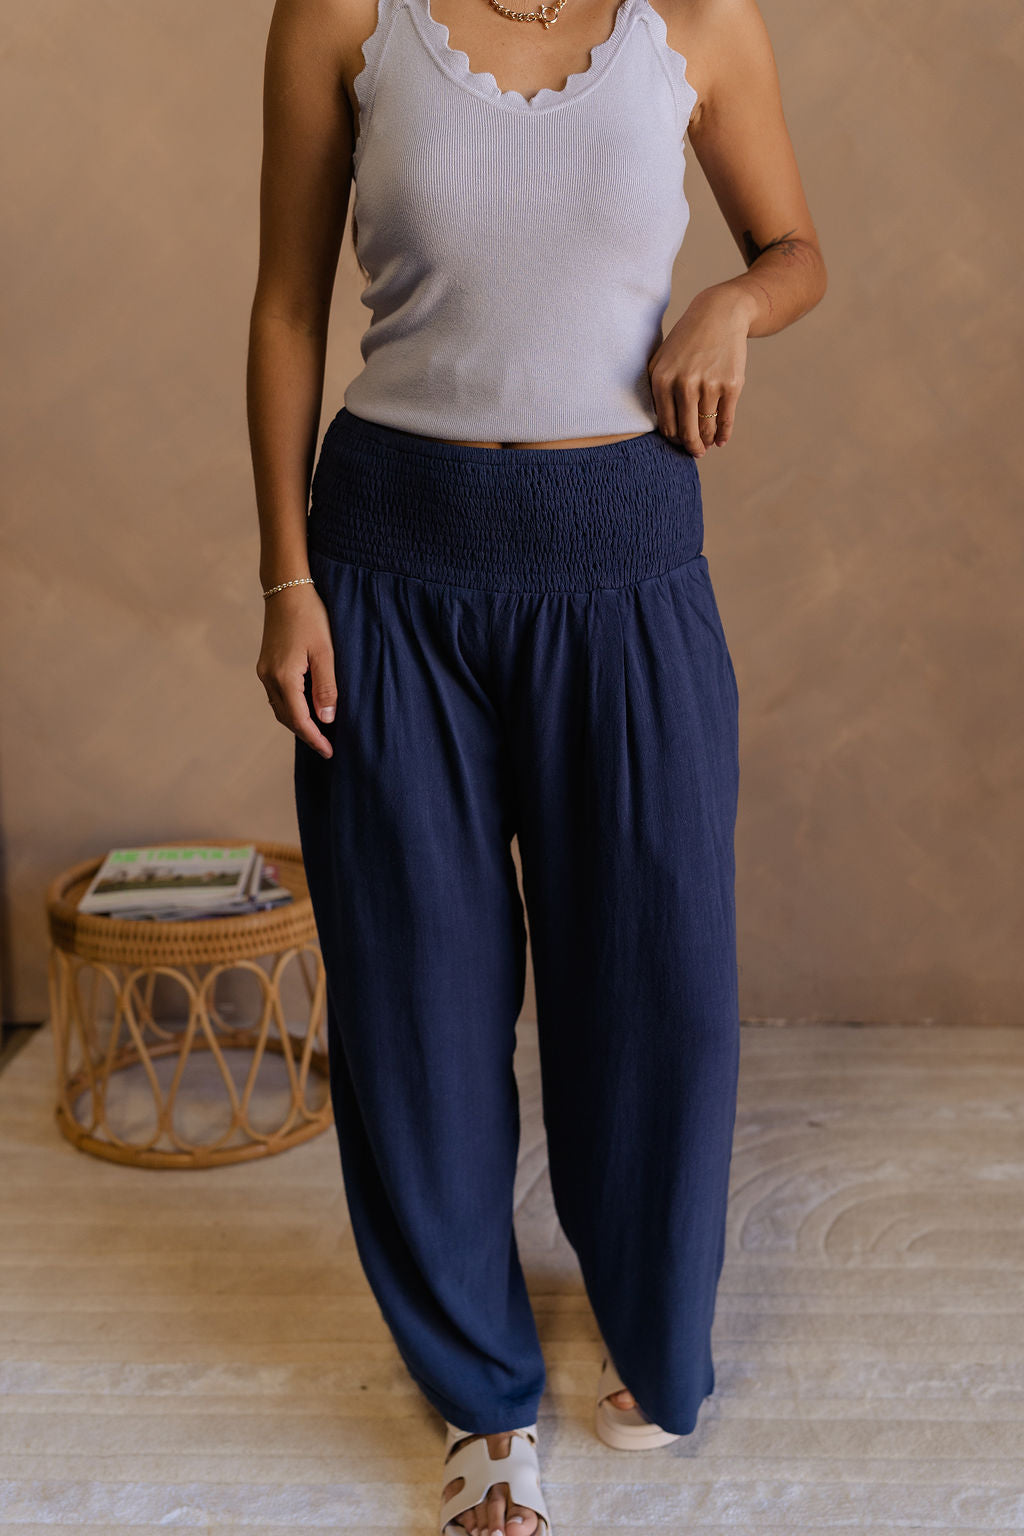 Front view of female model wearing the Olivia Navy Blue Smocked Pants which features Navy Knit Fabric, Wide Pant Legs, Navy Lining and Smocked Waistband